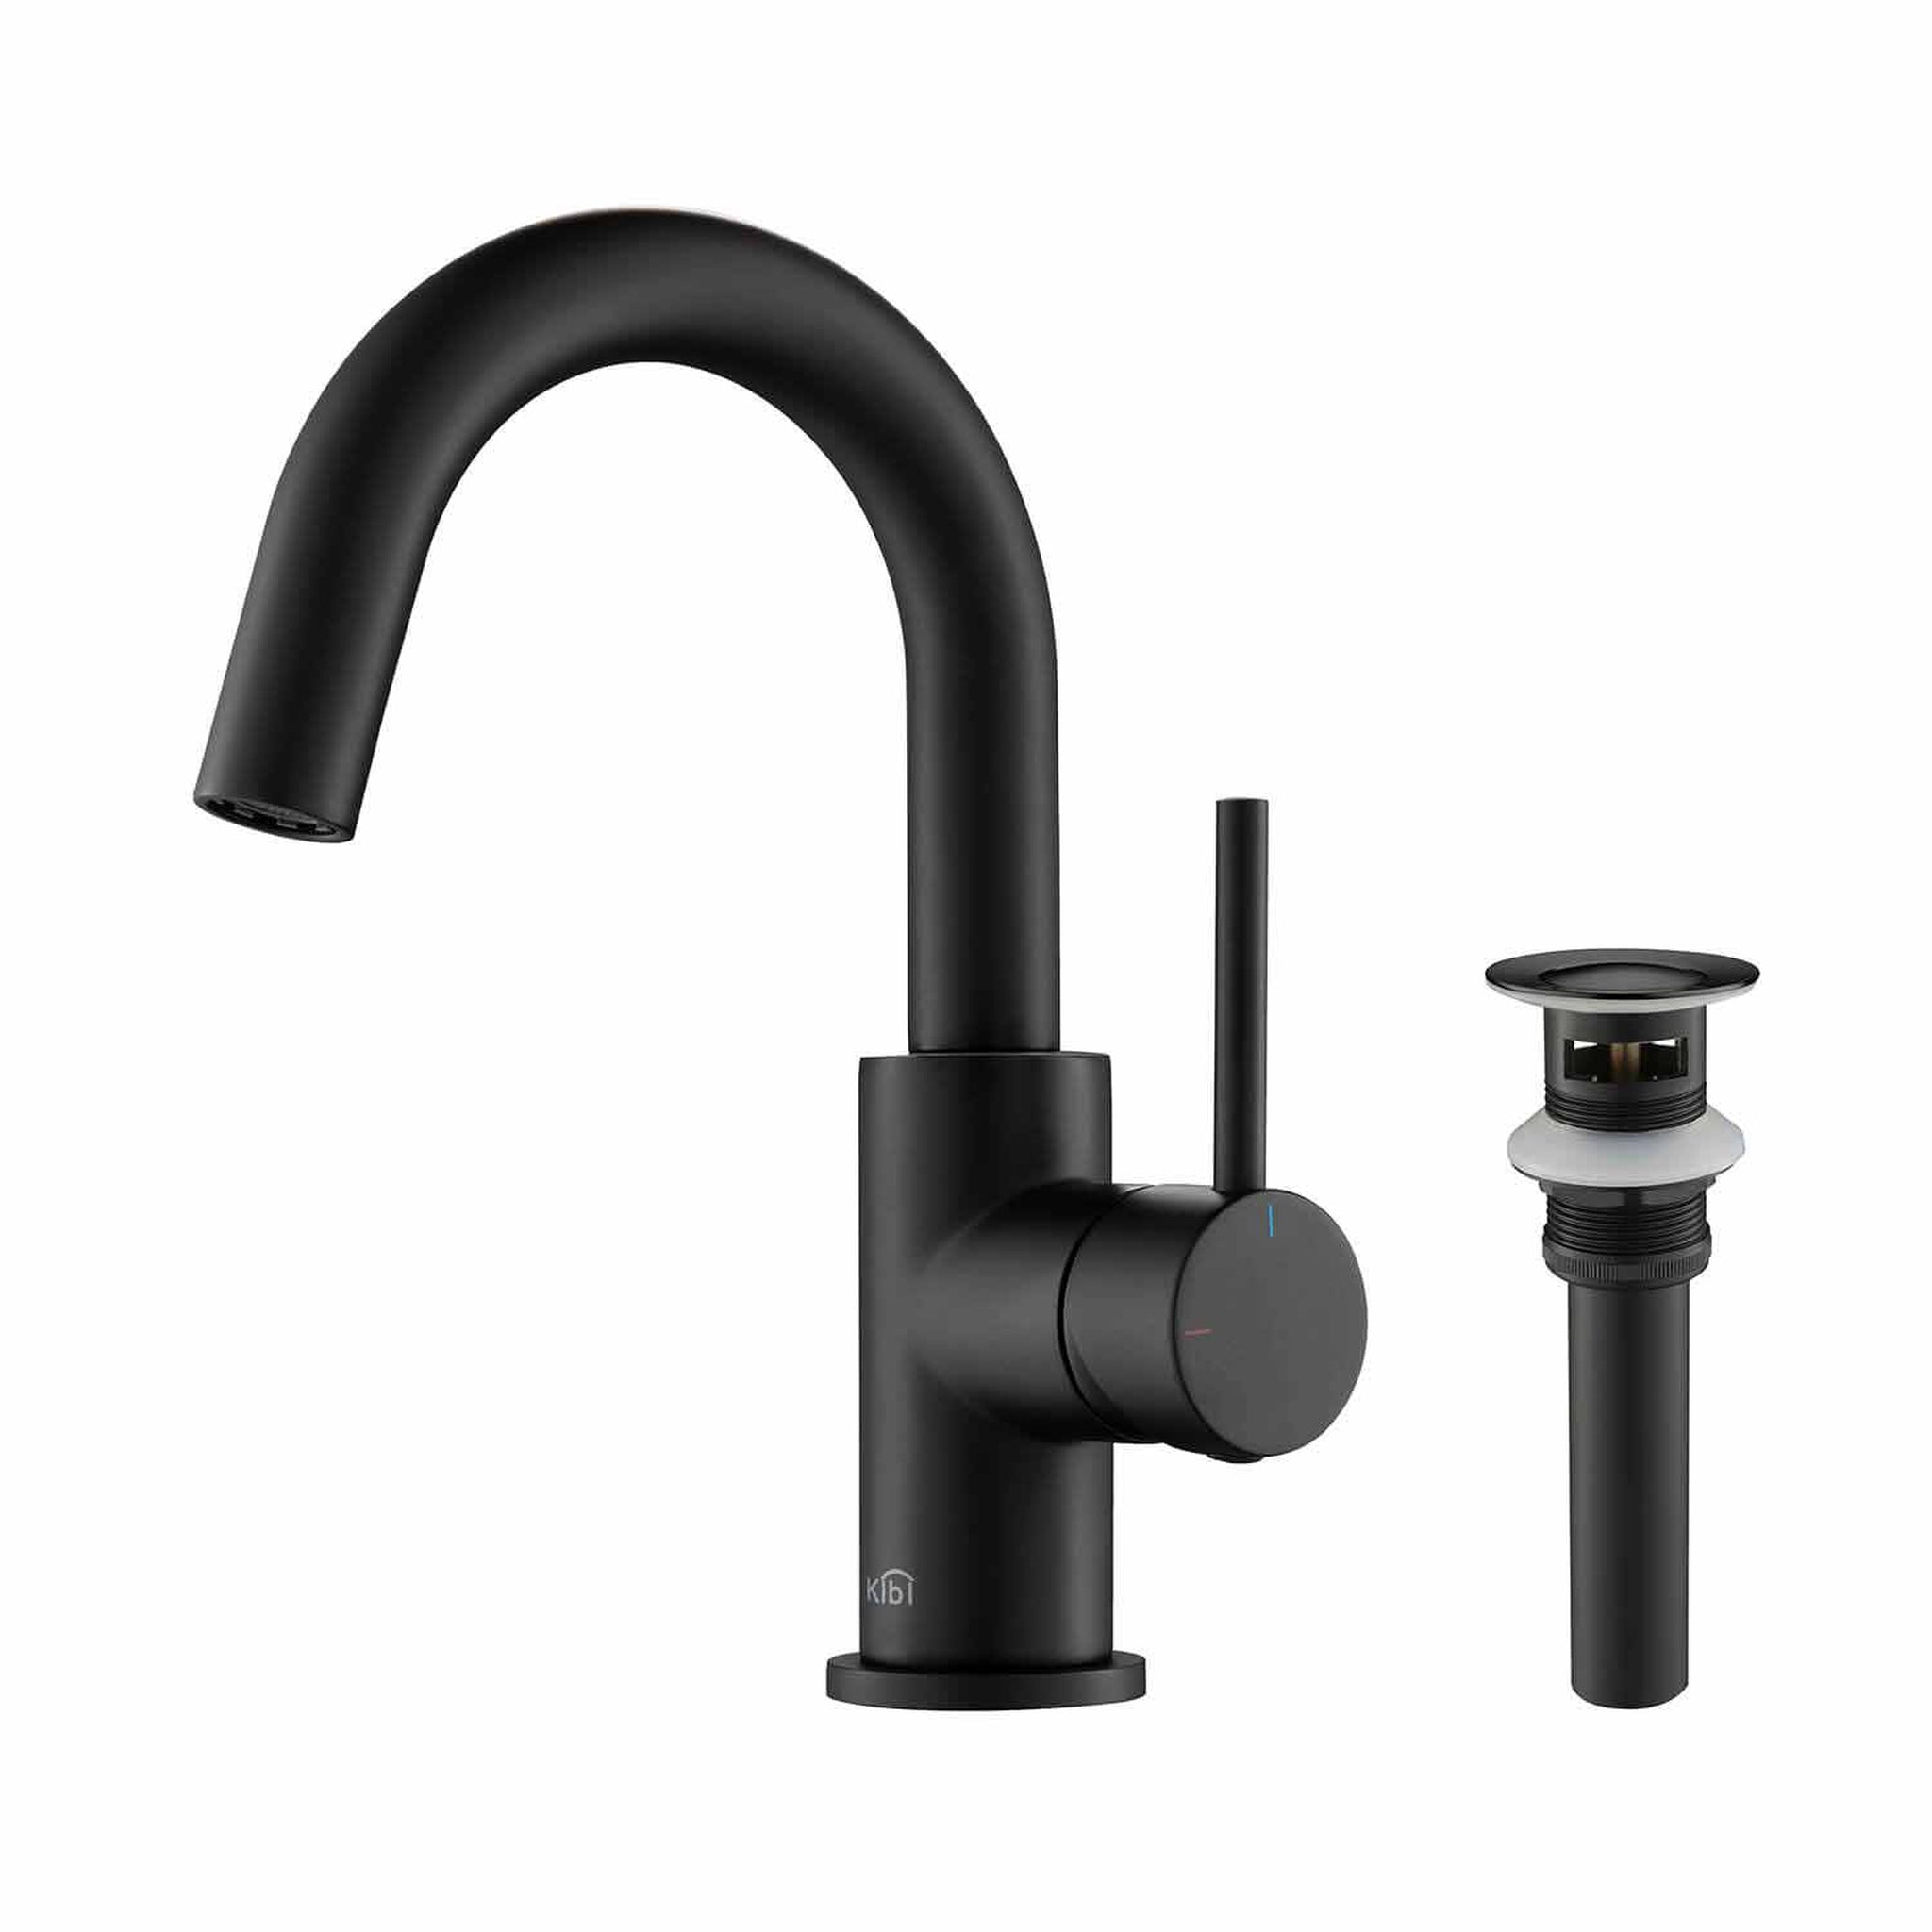 KIBI, KIBI Circular High-Arc Single Handle Matte Black Solid Brass Bathroom Sink Faucet With Pop-Up Drain Stopper Small Cover With Overflow